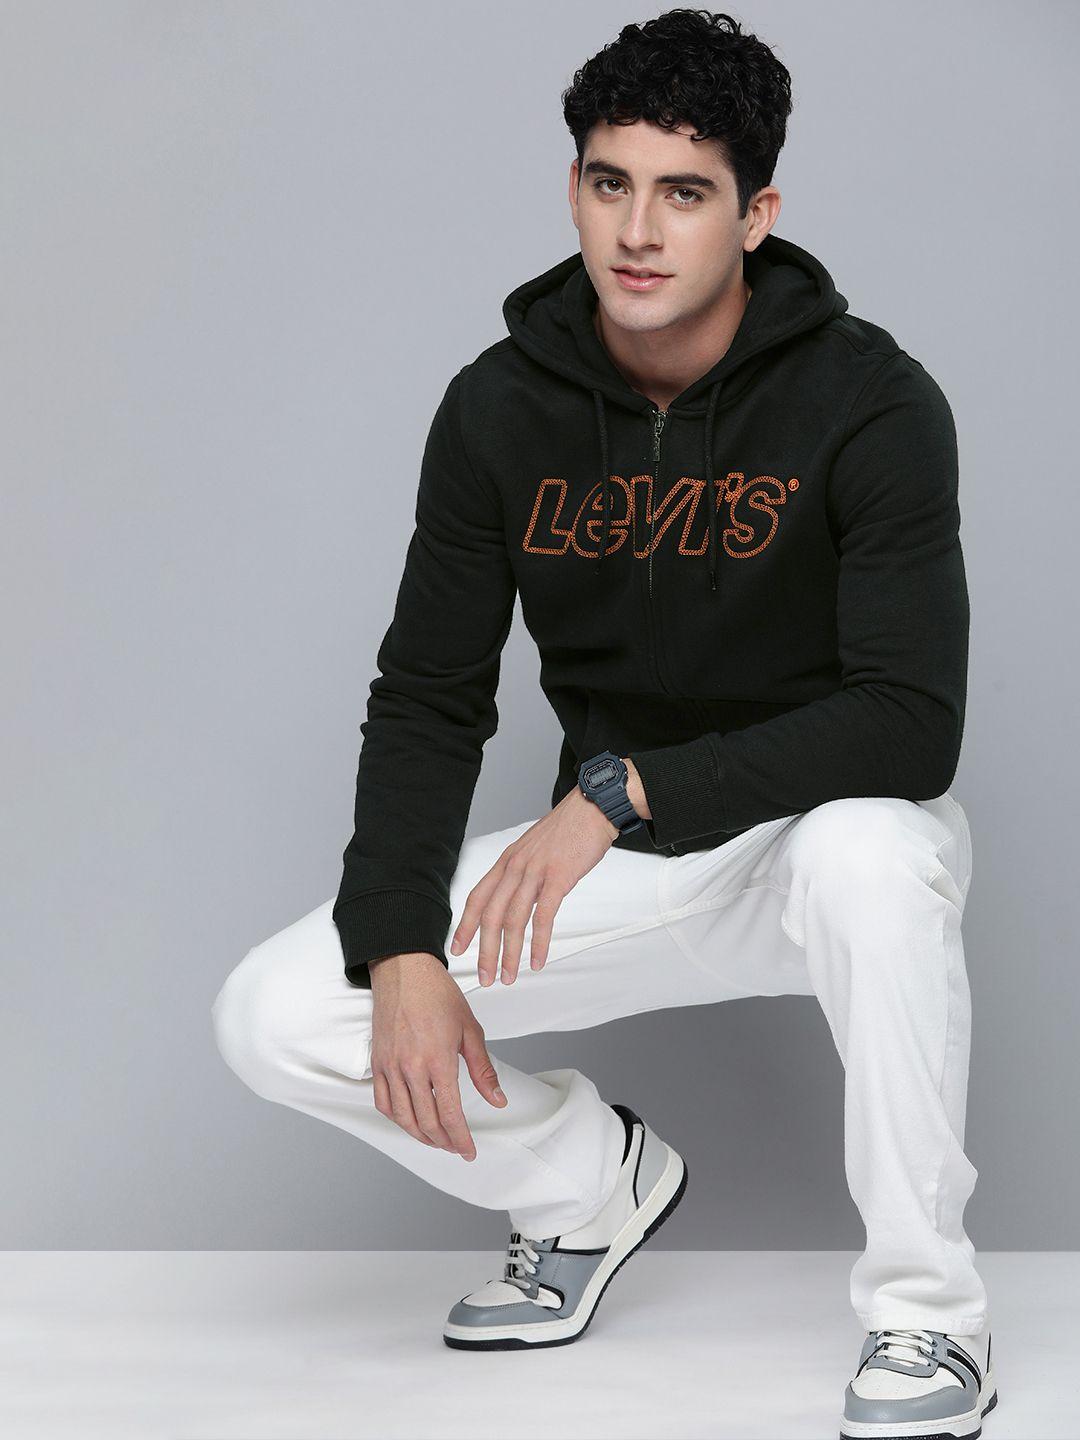 levis embroidered hooded pullover sweatshirt